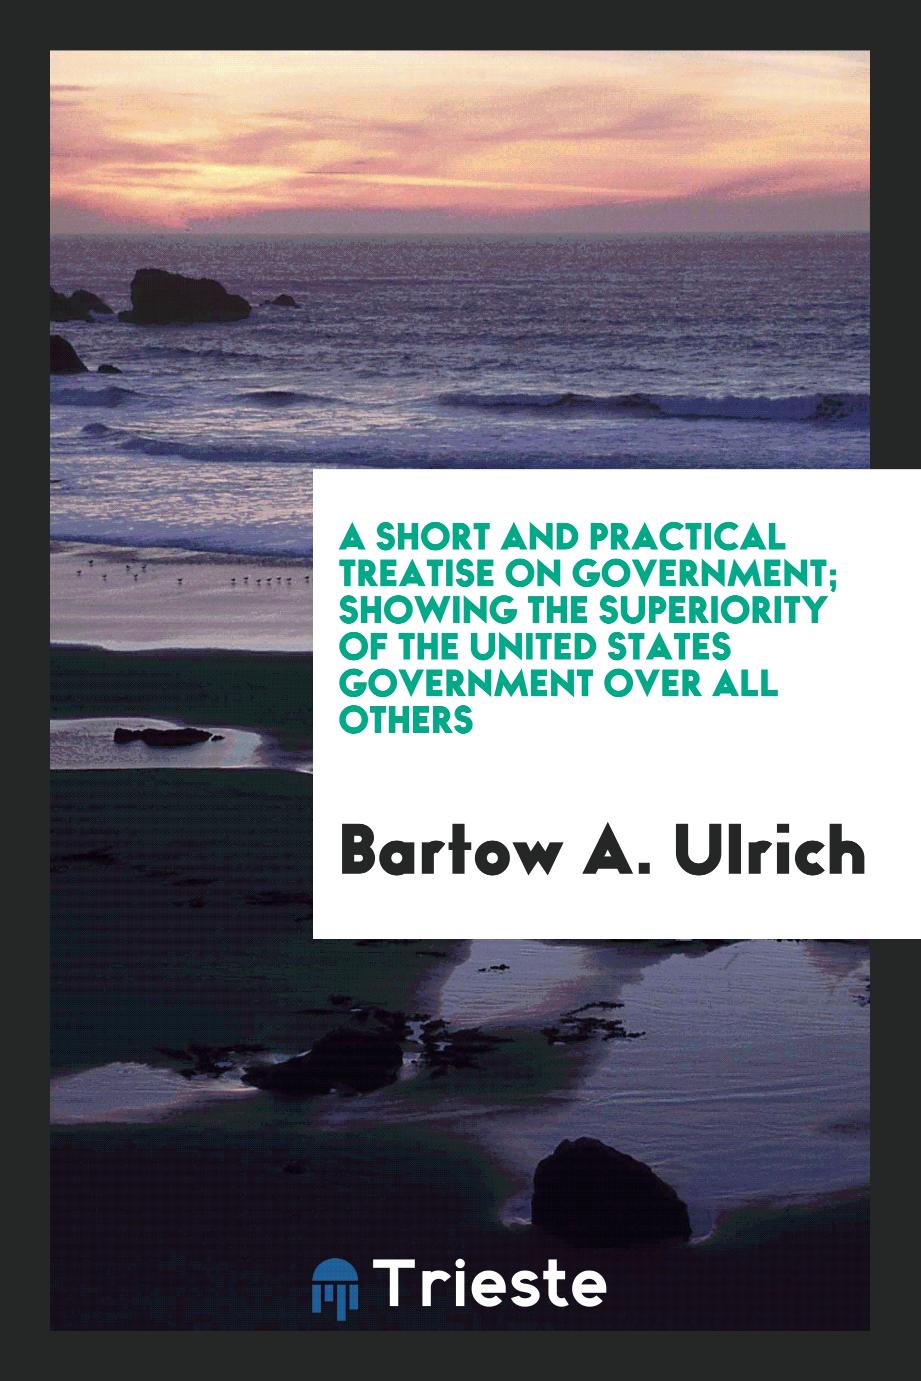 A short and practical treatise on government; showing the superiority of the United States government over all others